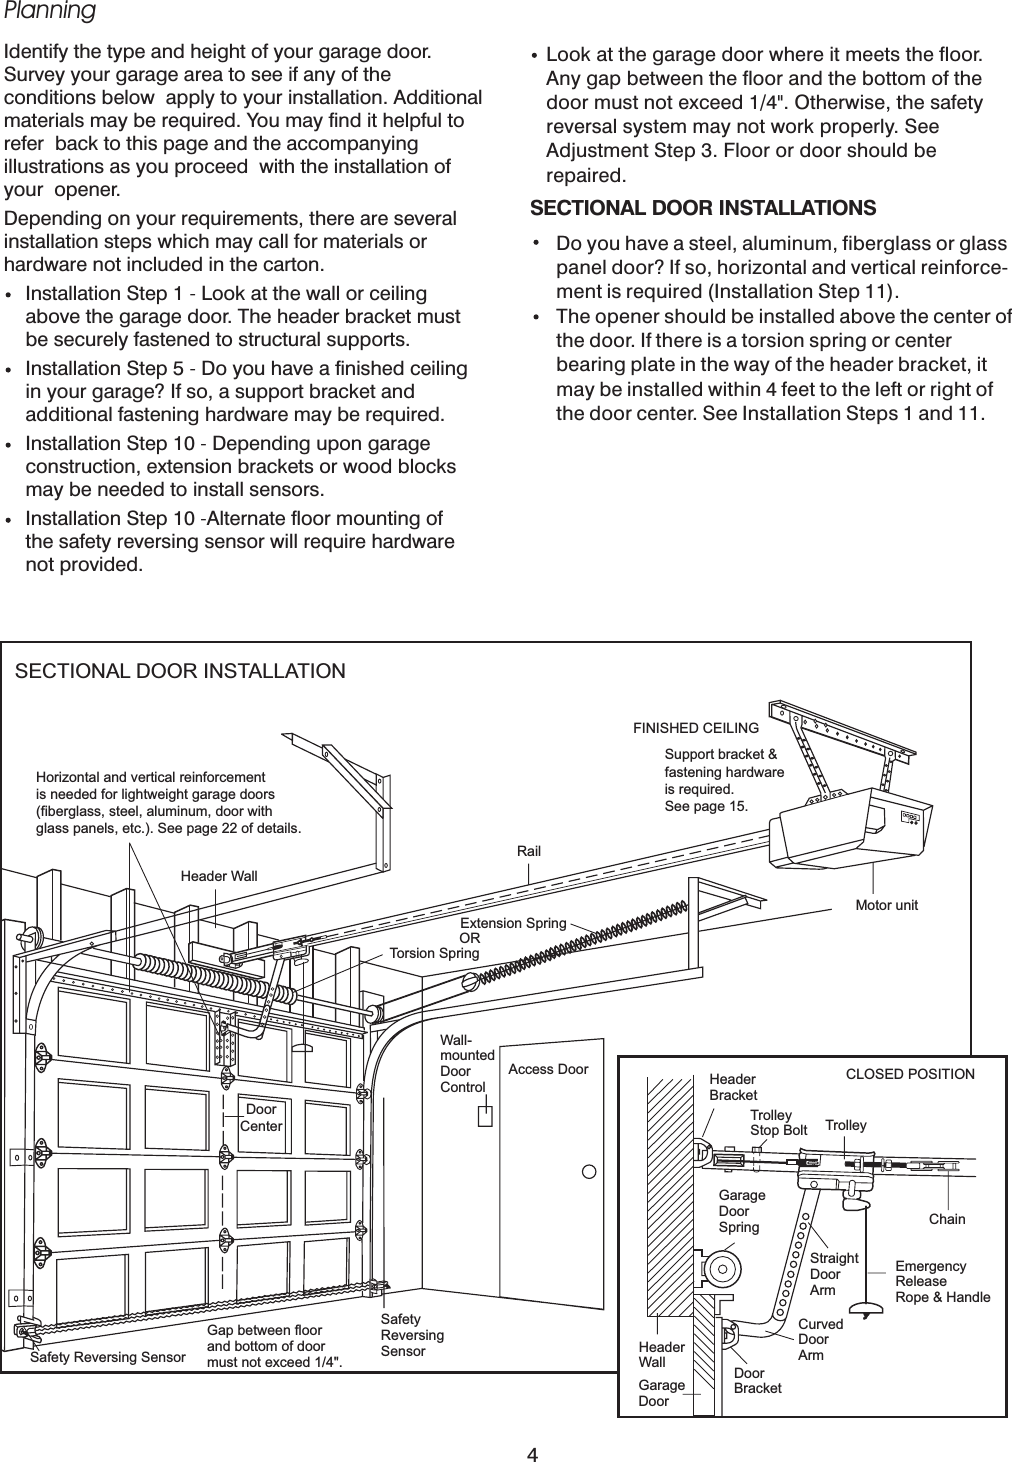 PlanningIdentify the type and height of your garage door.Survey your garage area to see if any of theconditions below apply to your installation. Additionalmaterials may be required. You may find it helpful torefer back to this page and the accompanyingillustrations as you proceed with the installation ofyour opener.Depending on your requirements, there are severalinstallation steps which may call for materials orhardware not included in the carton.Installation Step 1 Look at the wall or ceilingabove the garage door. The header bracket mustbe securely fastened to structural supports.Installation Step 5 Do you have a finished ceilingin your garage? If so, a support bracket andadditional fastening hardware may be required.Installation Step 10 Depending upon garageconstruction, extension brackets or wood blocksmay be needed to install sensors.Installation Step 10 Alternate floor mounting ofthe safety reversing sensor will require hardwarenot provided.----Look at the garage door where it meets the floor.Any gap between the floor and the bottom of thedoor must not exceed 1/4&quot;. Otherwise, the safetyreversal system may not work properly. SeeAdjustment Step 3. Floor or door should berepaired.SECTIONAL DOOR INSTALLATIONSDo you have a steel, aluminum, fiberglass or glasspanel door? If so, horizontal and vertical reinforce-ment is required (Installation Step 11).The opener should be installed above the center ofthe door. If there is a torsion spring or centerbearing plate in the way of the header bracket, itmay be installed within 4 feet to the left or right ofthe door center. See Installation Steps 1 and 11.SECTIONAL DOOR INSTALLATIONHorizontal and vertical reinforcementis needed for lightweight garage doors(fiberglass, steel, aluminum, door withglass panels, etc.). See page 22 of details.Header WallDoorCenterRailExtension SpringORTorsion SpringWall-mountedDoorControlAccess DoorMotor unitFINISHED CEILINGSupport bracket &amp;fastening hardwareis required.See page 15.Safety Reversing SensorGap between floorand bottom of doormust not exceed 1/4&quot;.SafetyReversingSensorHeaderBracketTrolleyStop Bolt TrolleyCLOSED POSITIONChainGarageDoorSpringEmergencyReleaseRope &amp; HandleStraightDoorArmCurvedDoorArmDoorBracketHeaderWallGarageDoor4